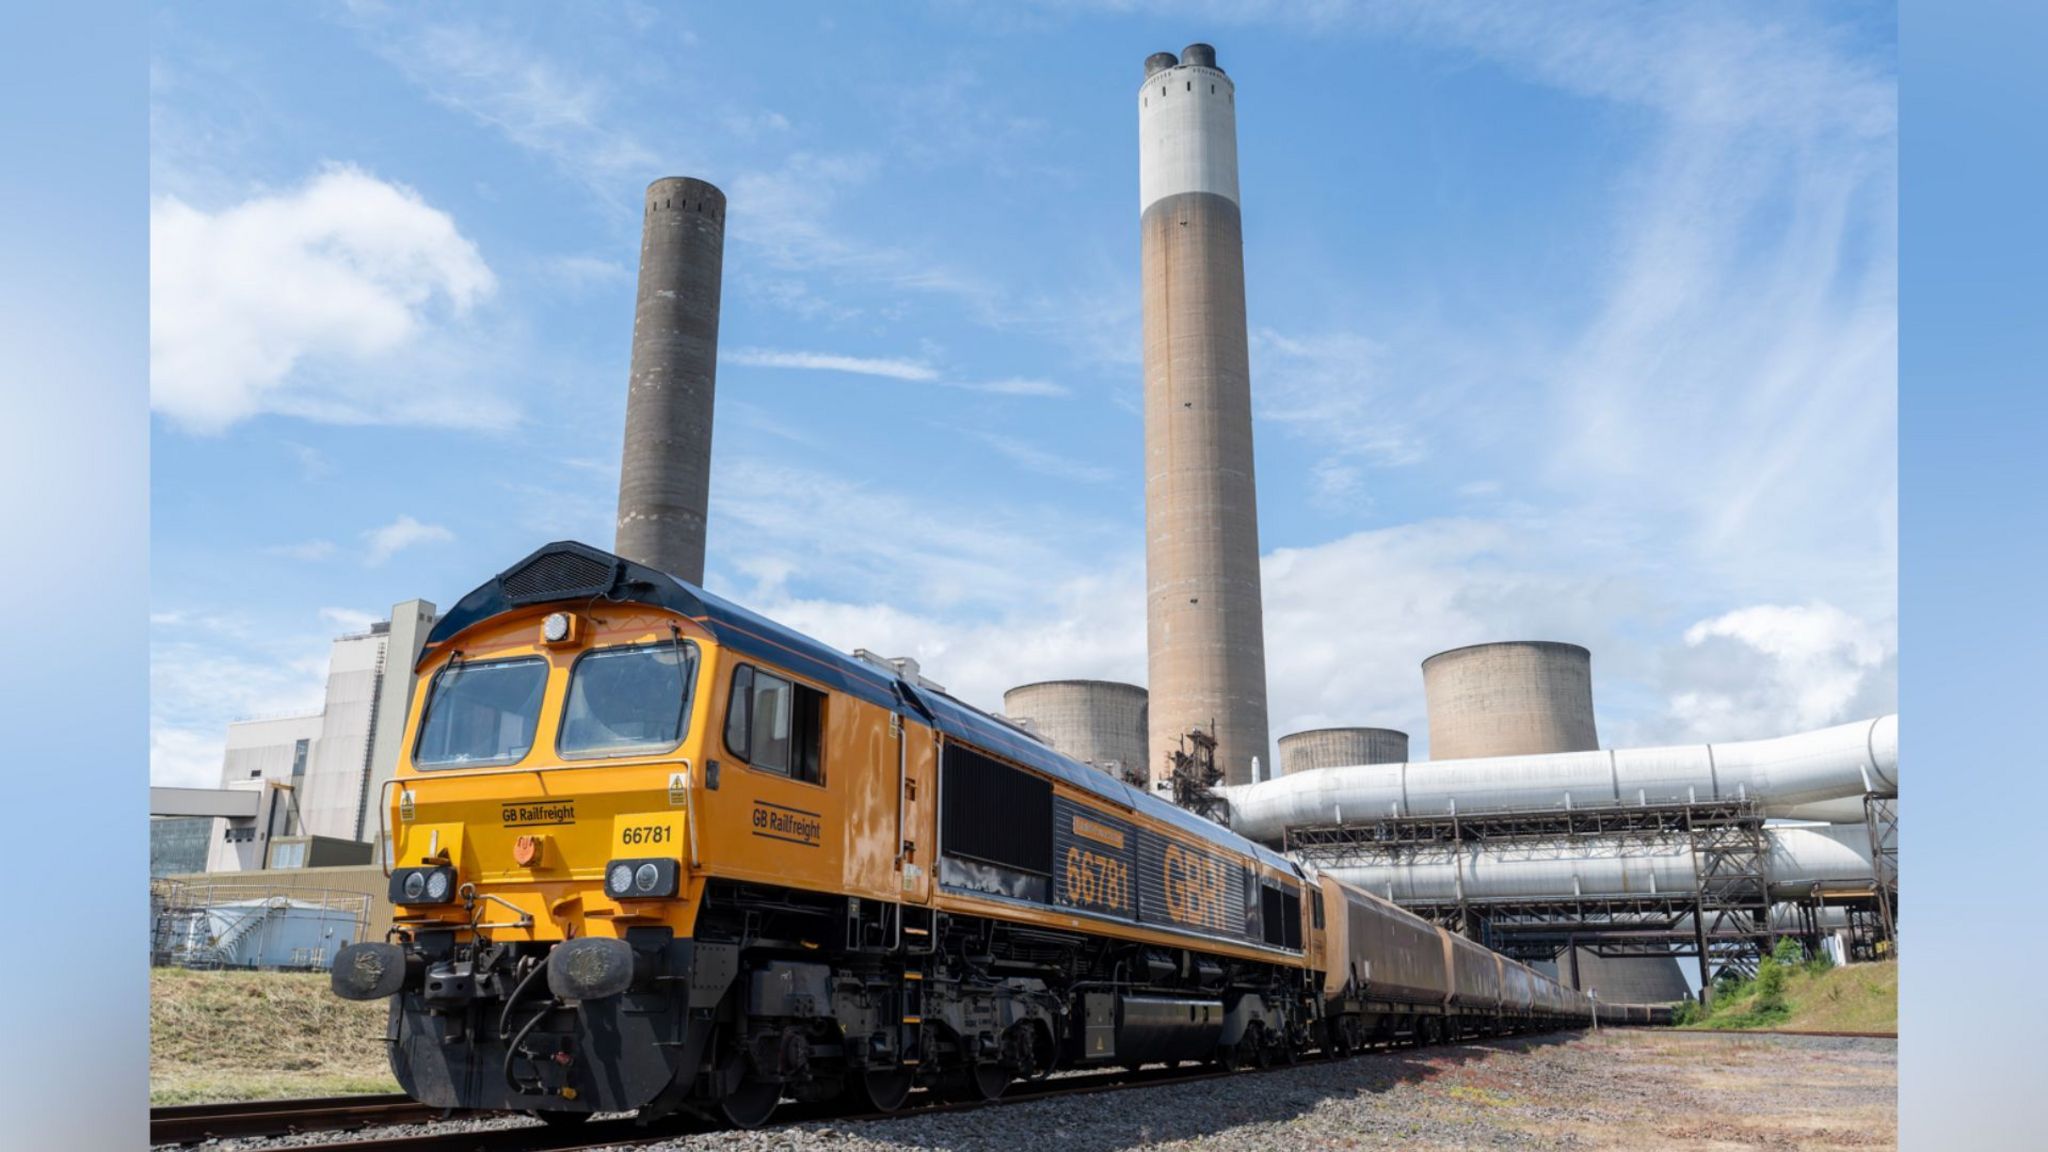 The last ever delivery of coal by rail